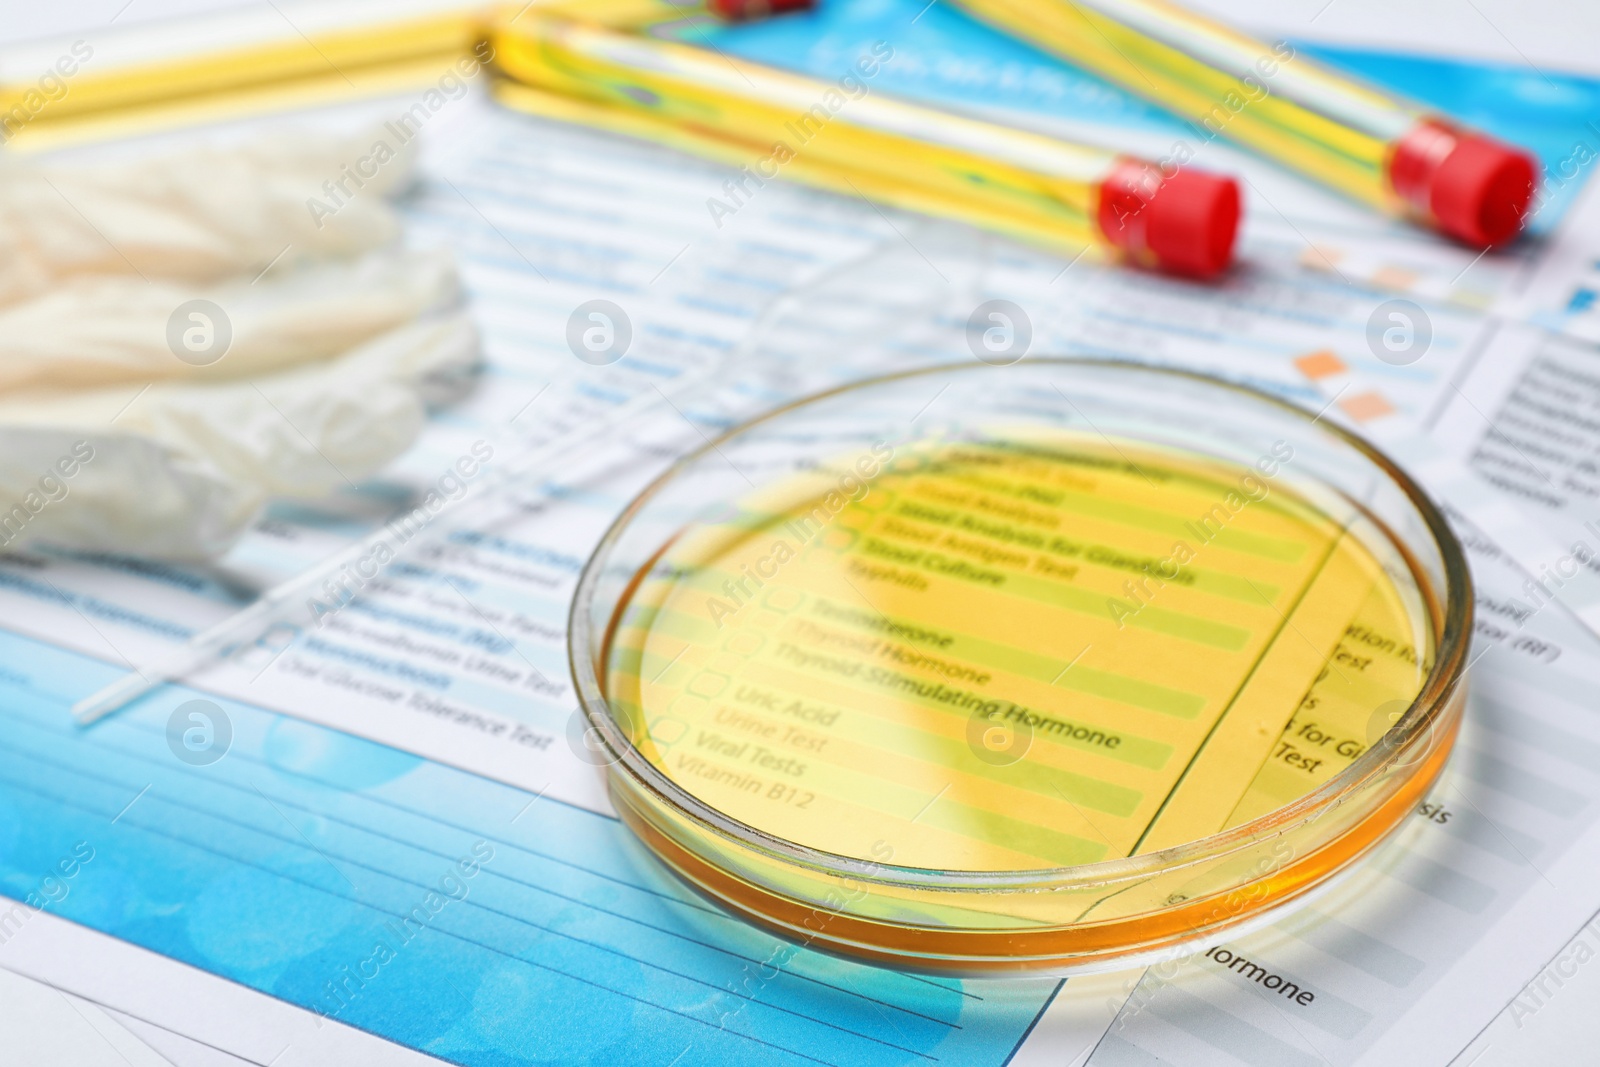 Photo of Glass dish with urine sample and test forms on table. Urology concept